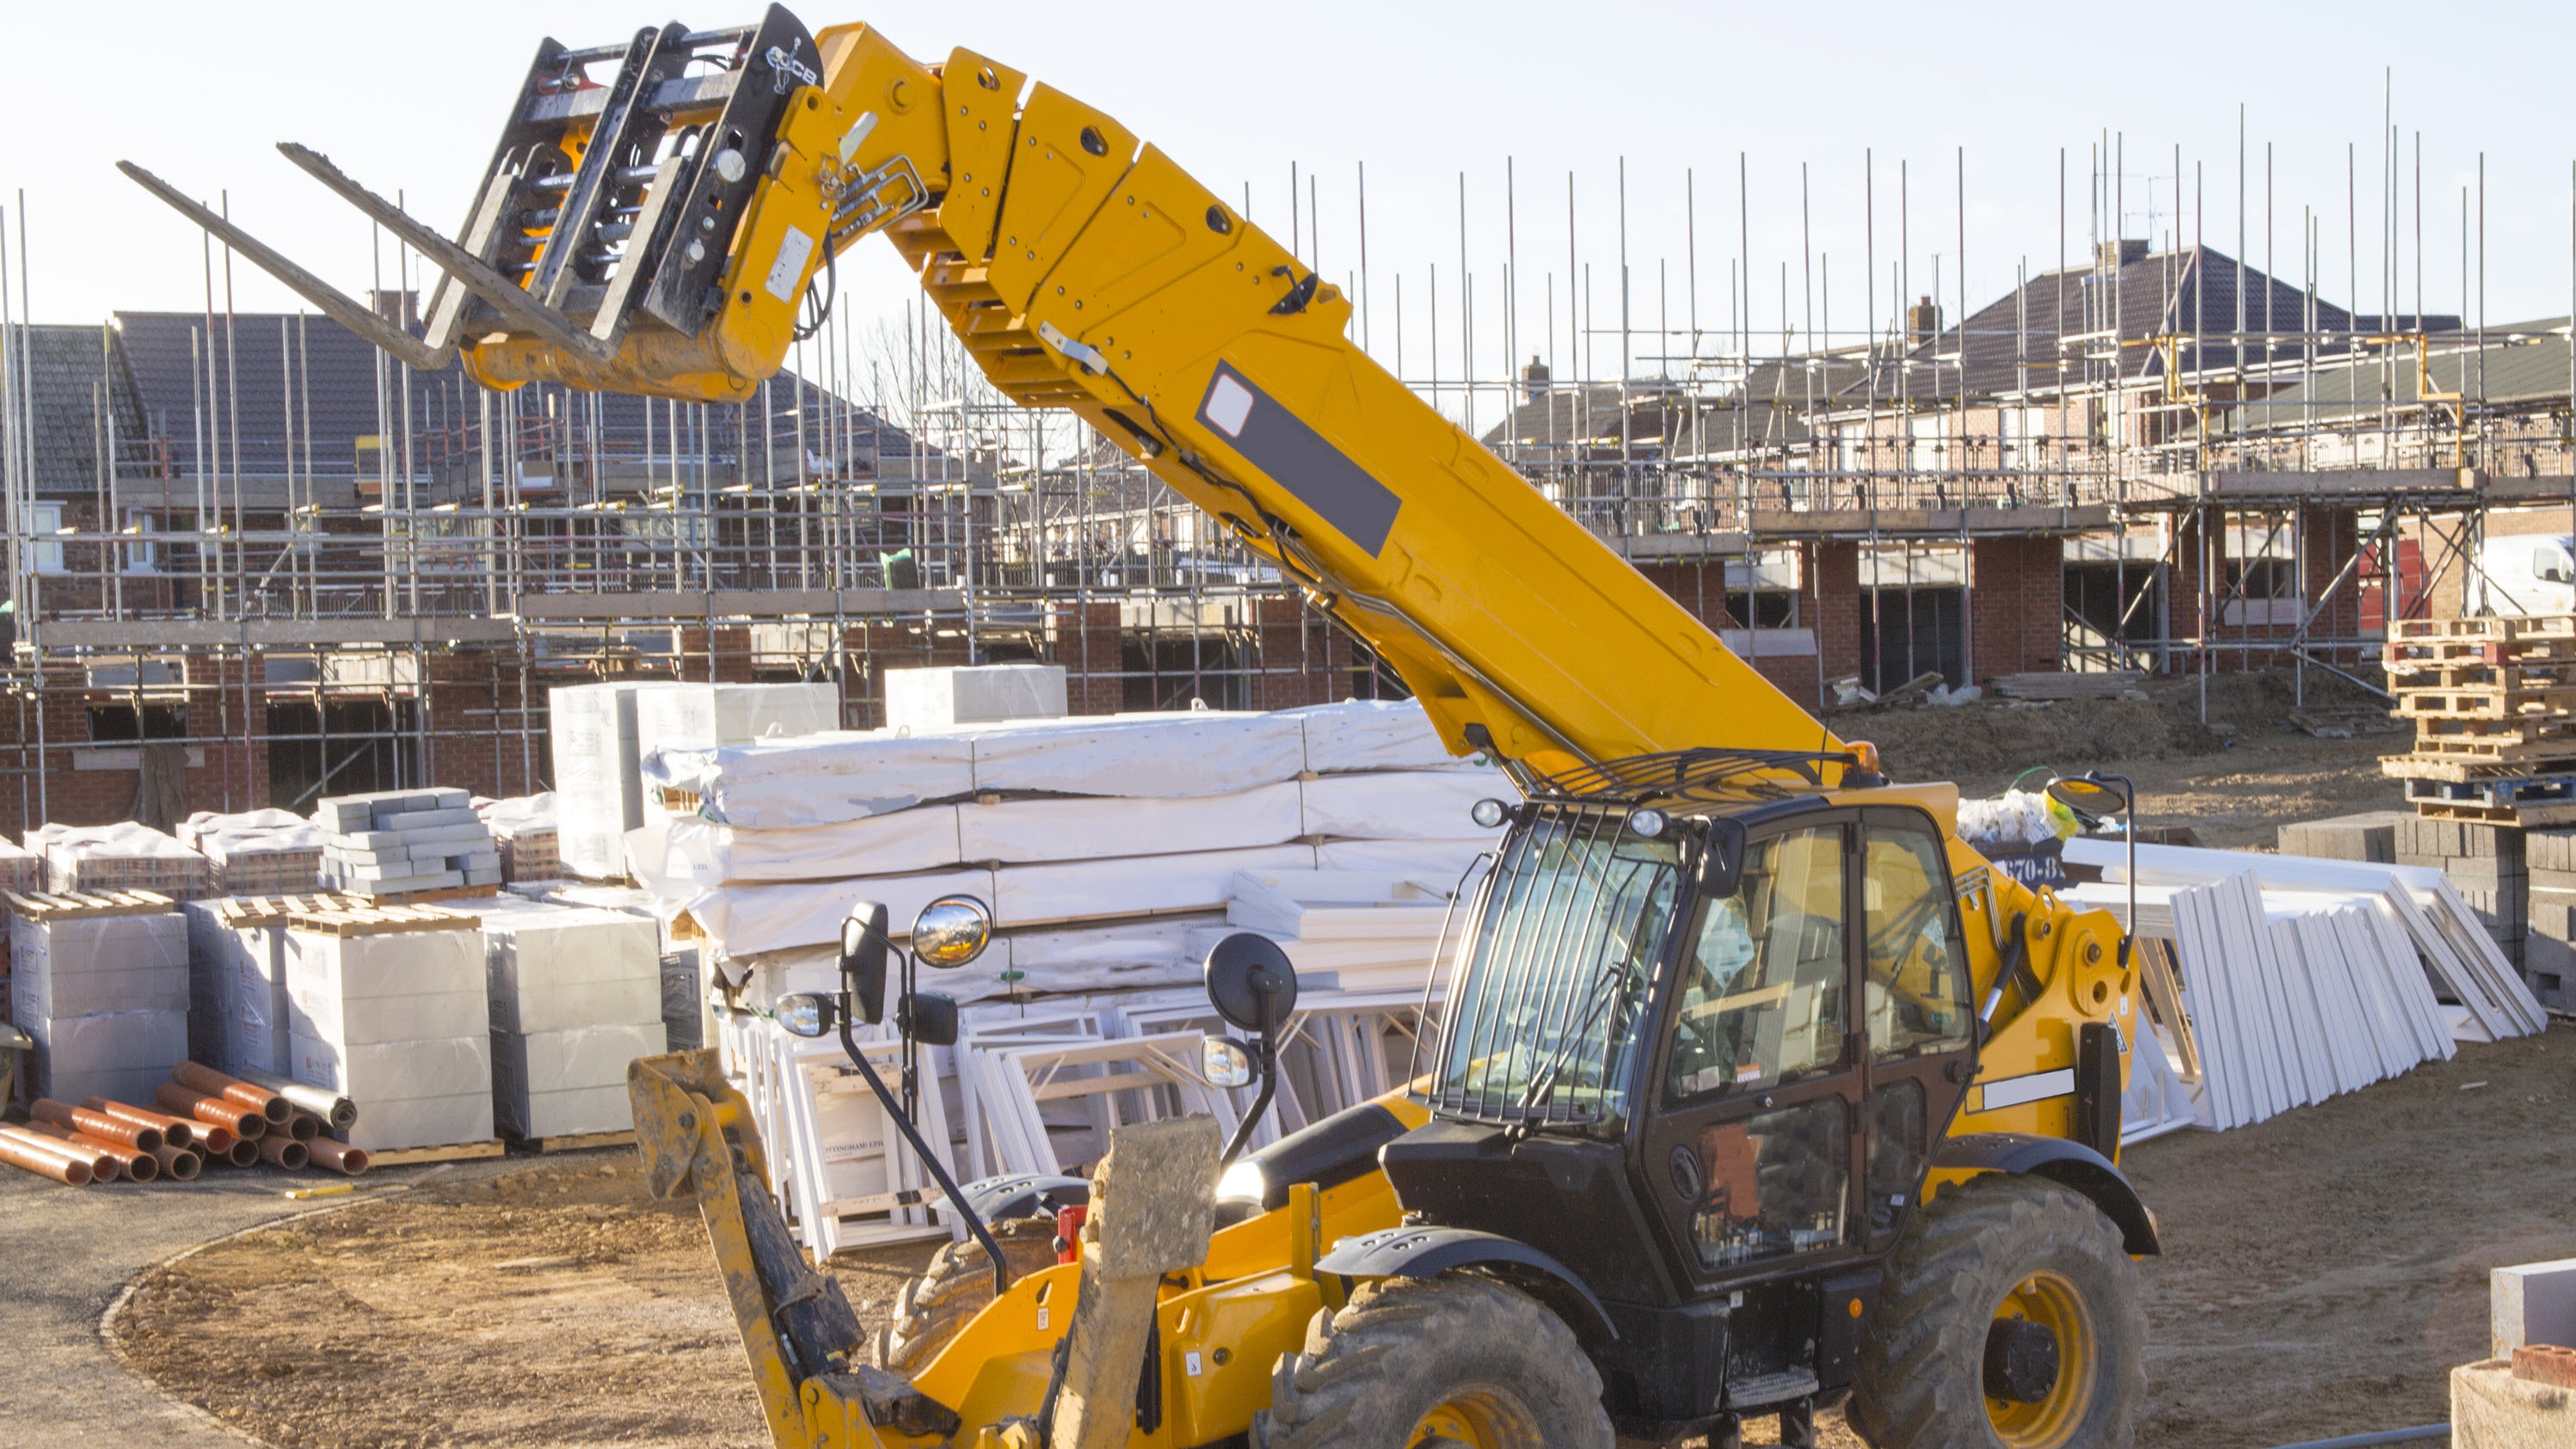 UK construction trends report: Exploring five key trends influencing the UK's construction market, and how those trends are impacting construction insurance risks.